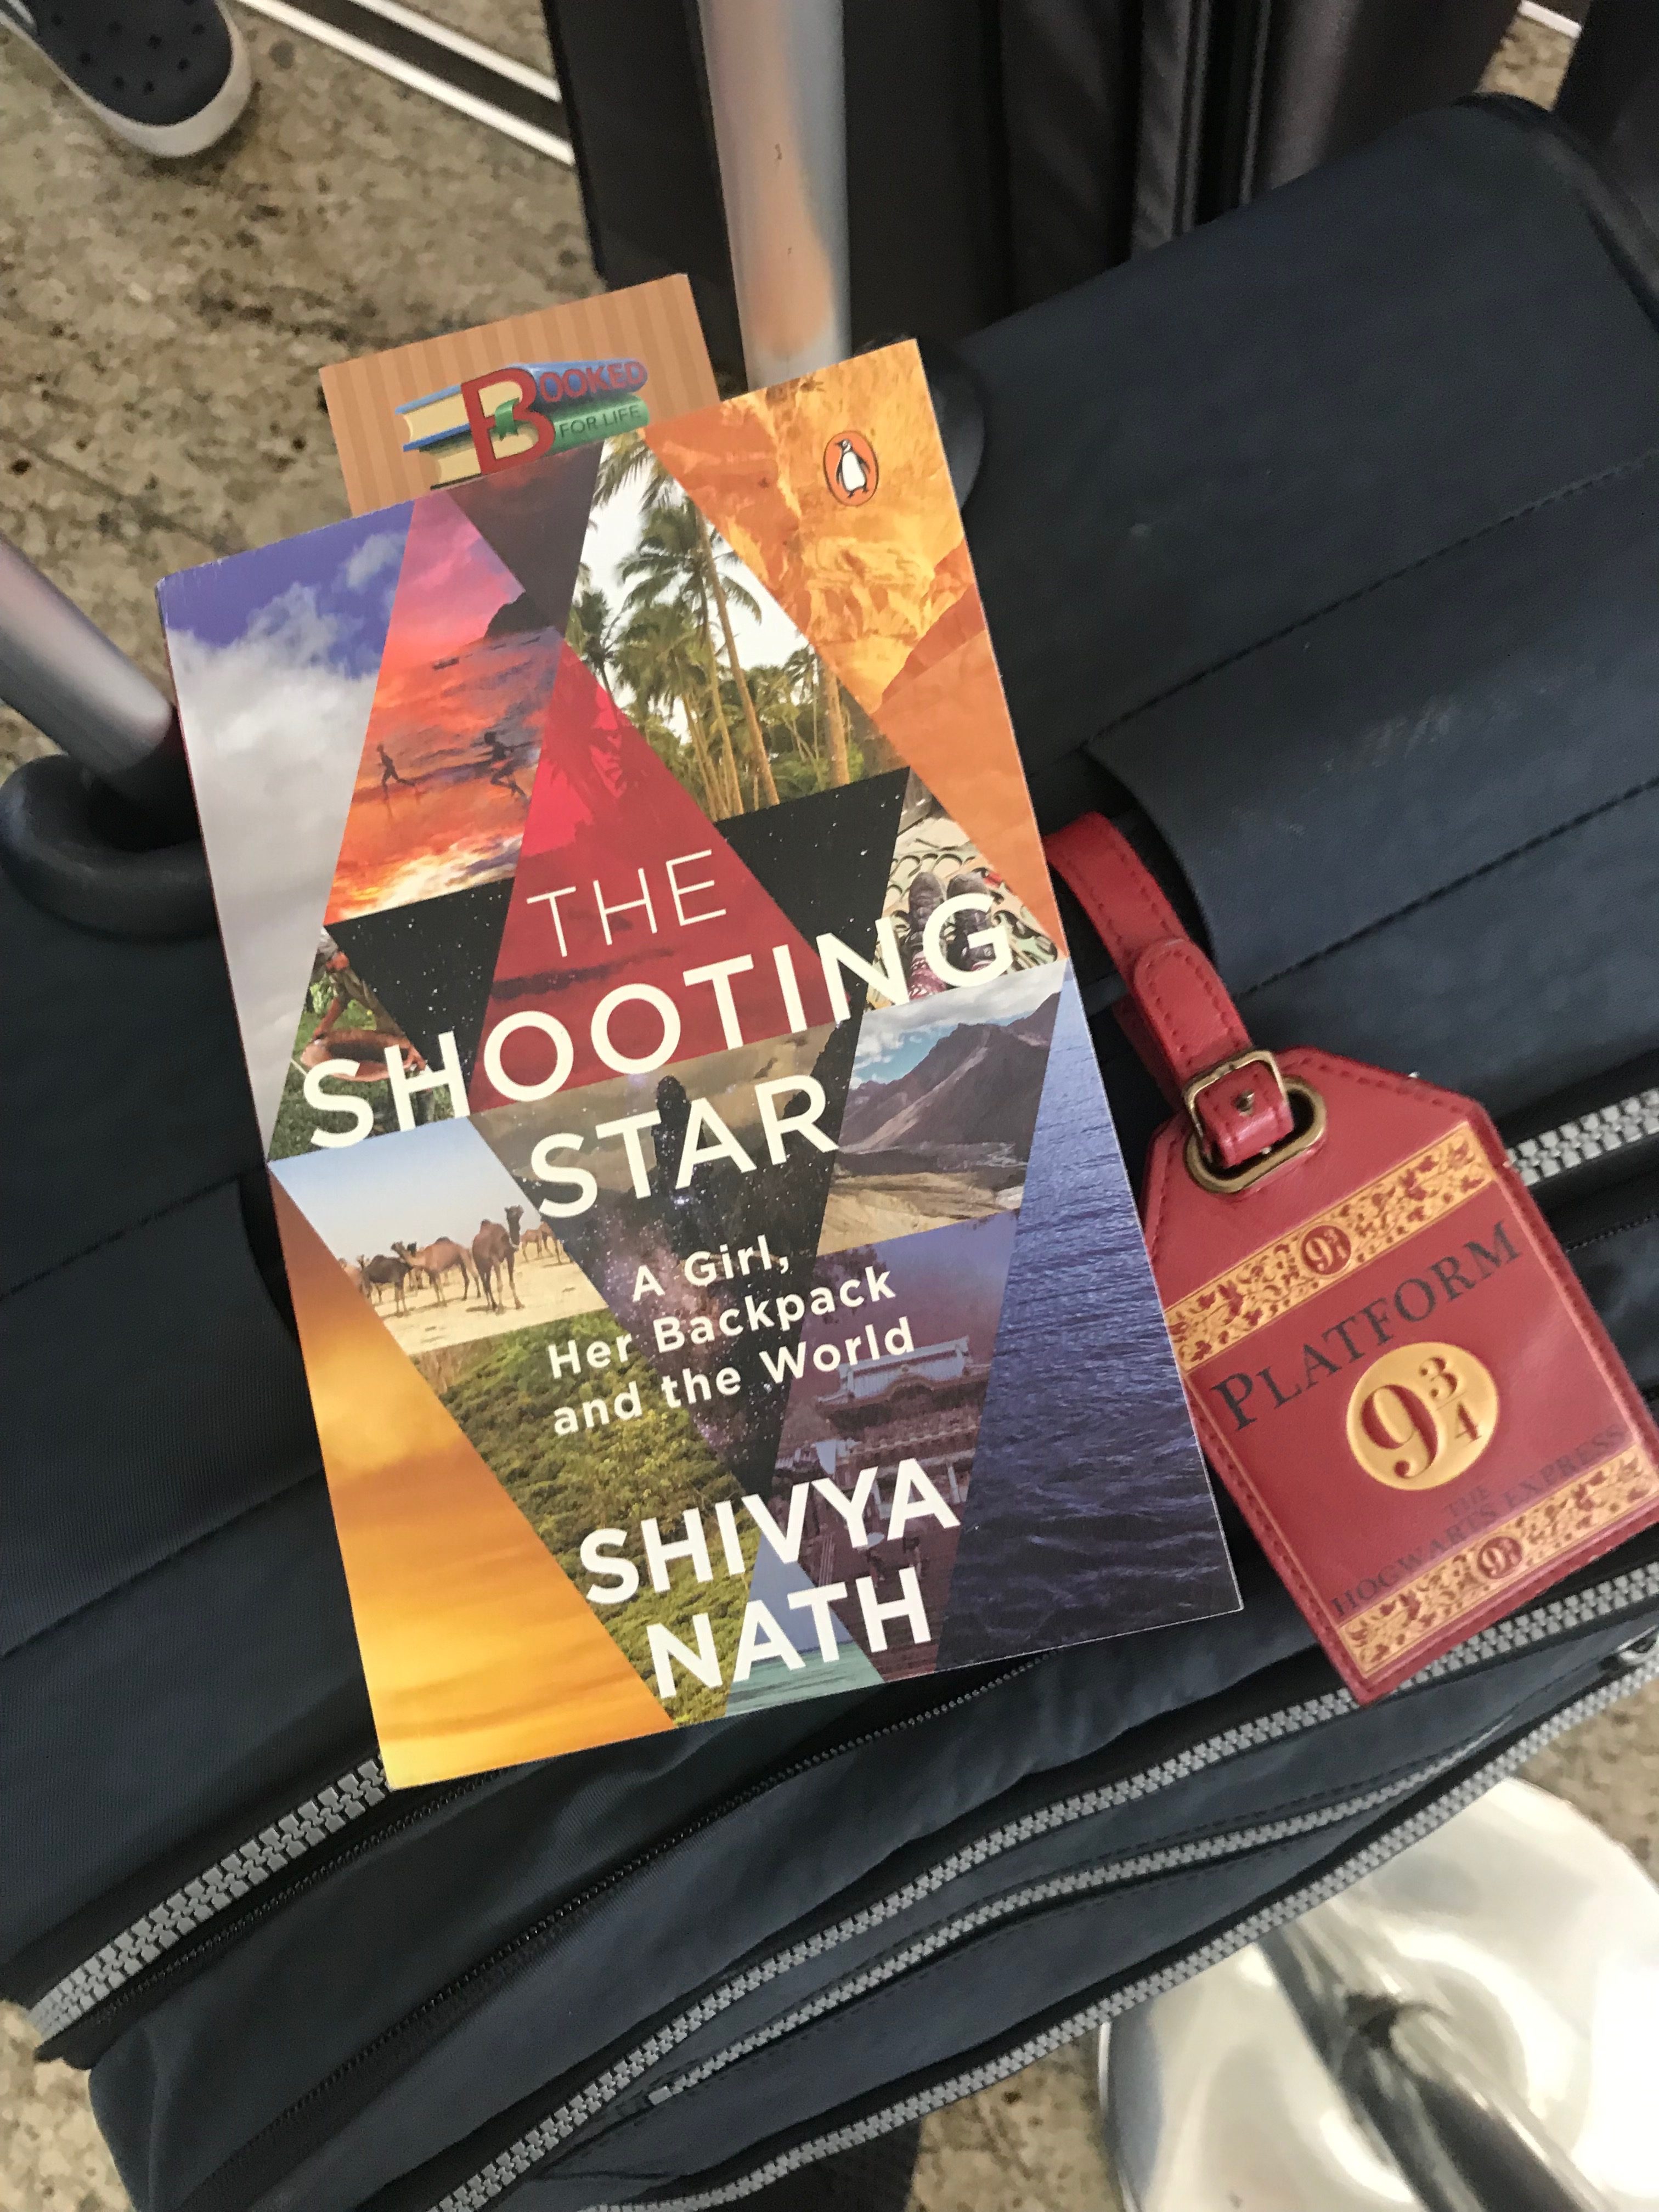 You are currently viewing The Shooting Star by Shivya Nath is a debut travel memoir that speaks about the power of authentic travel, and its far-reaching personal impact